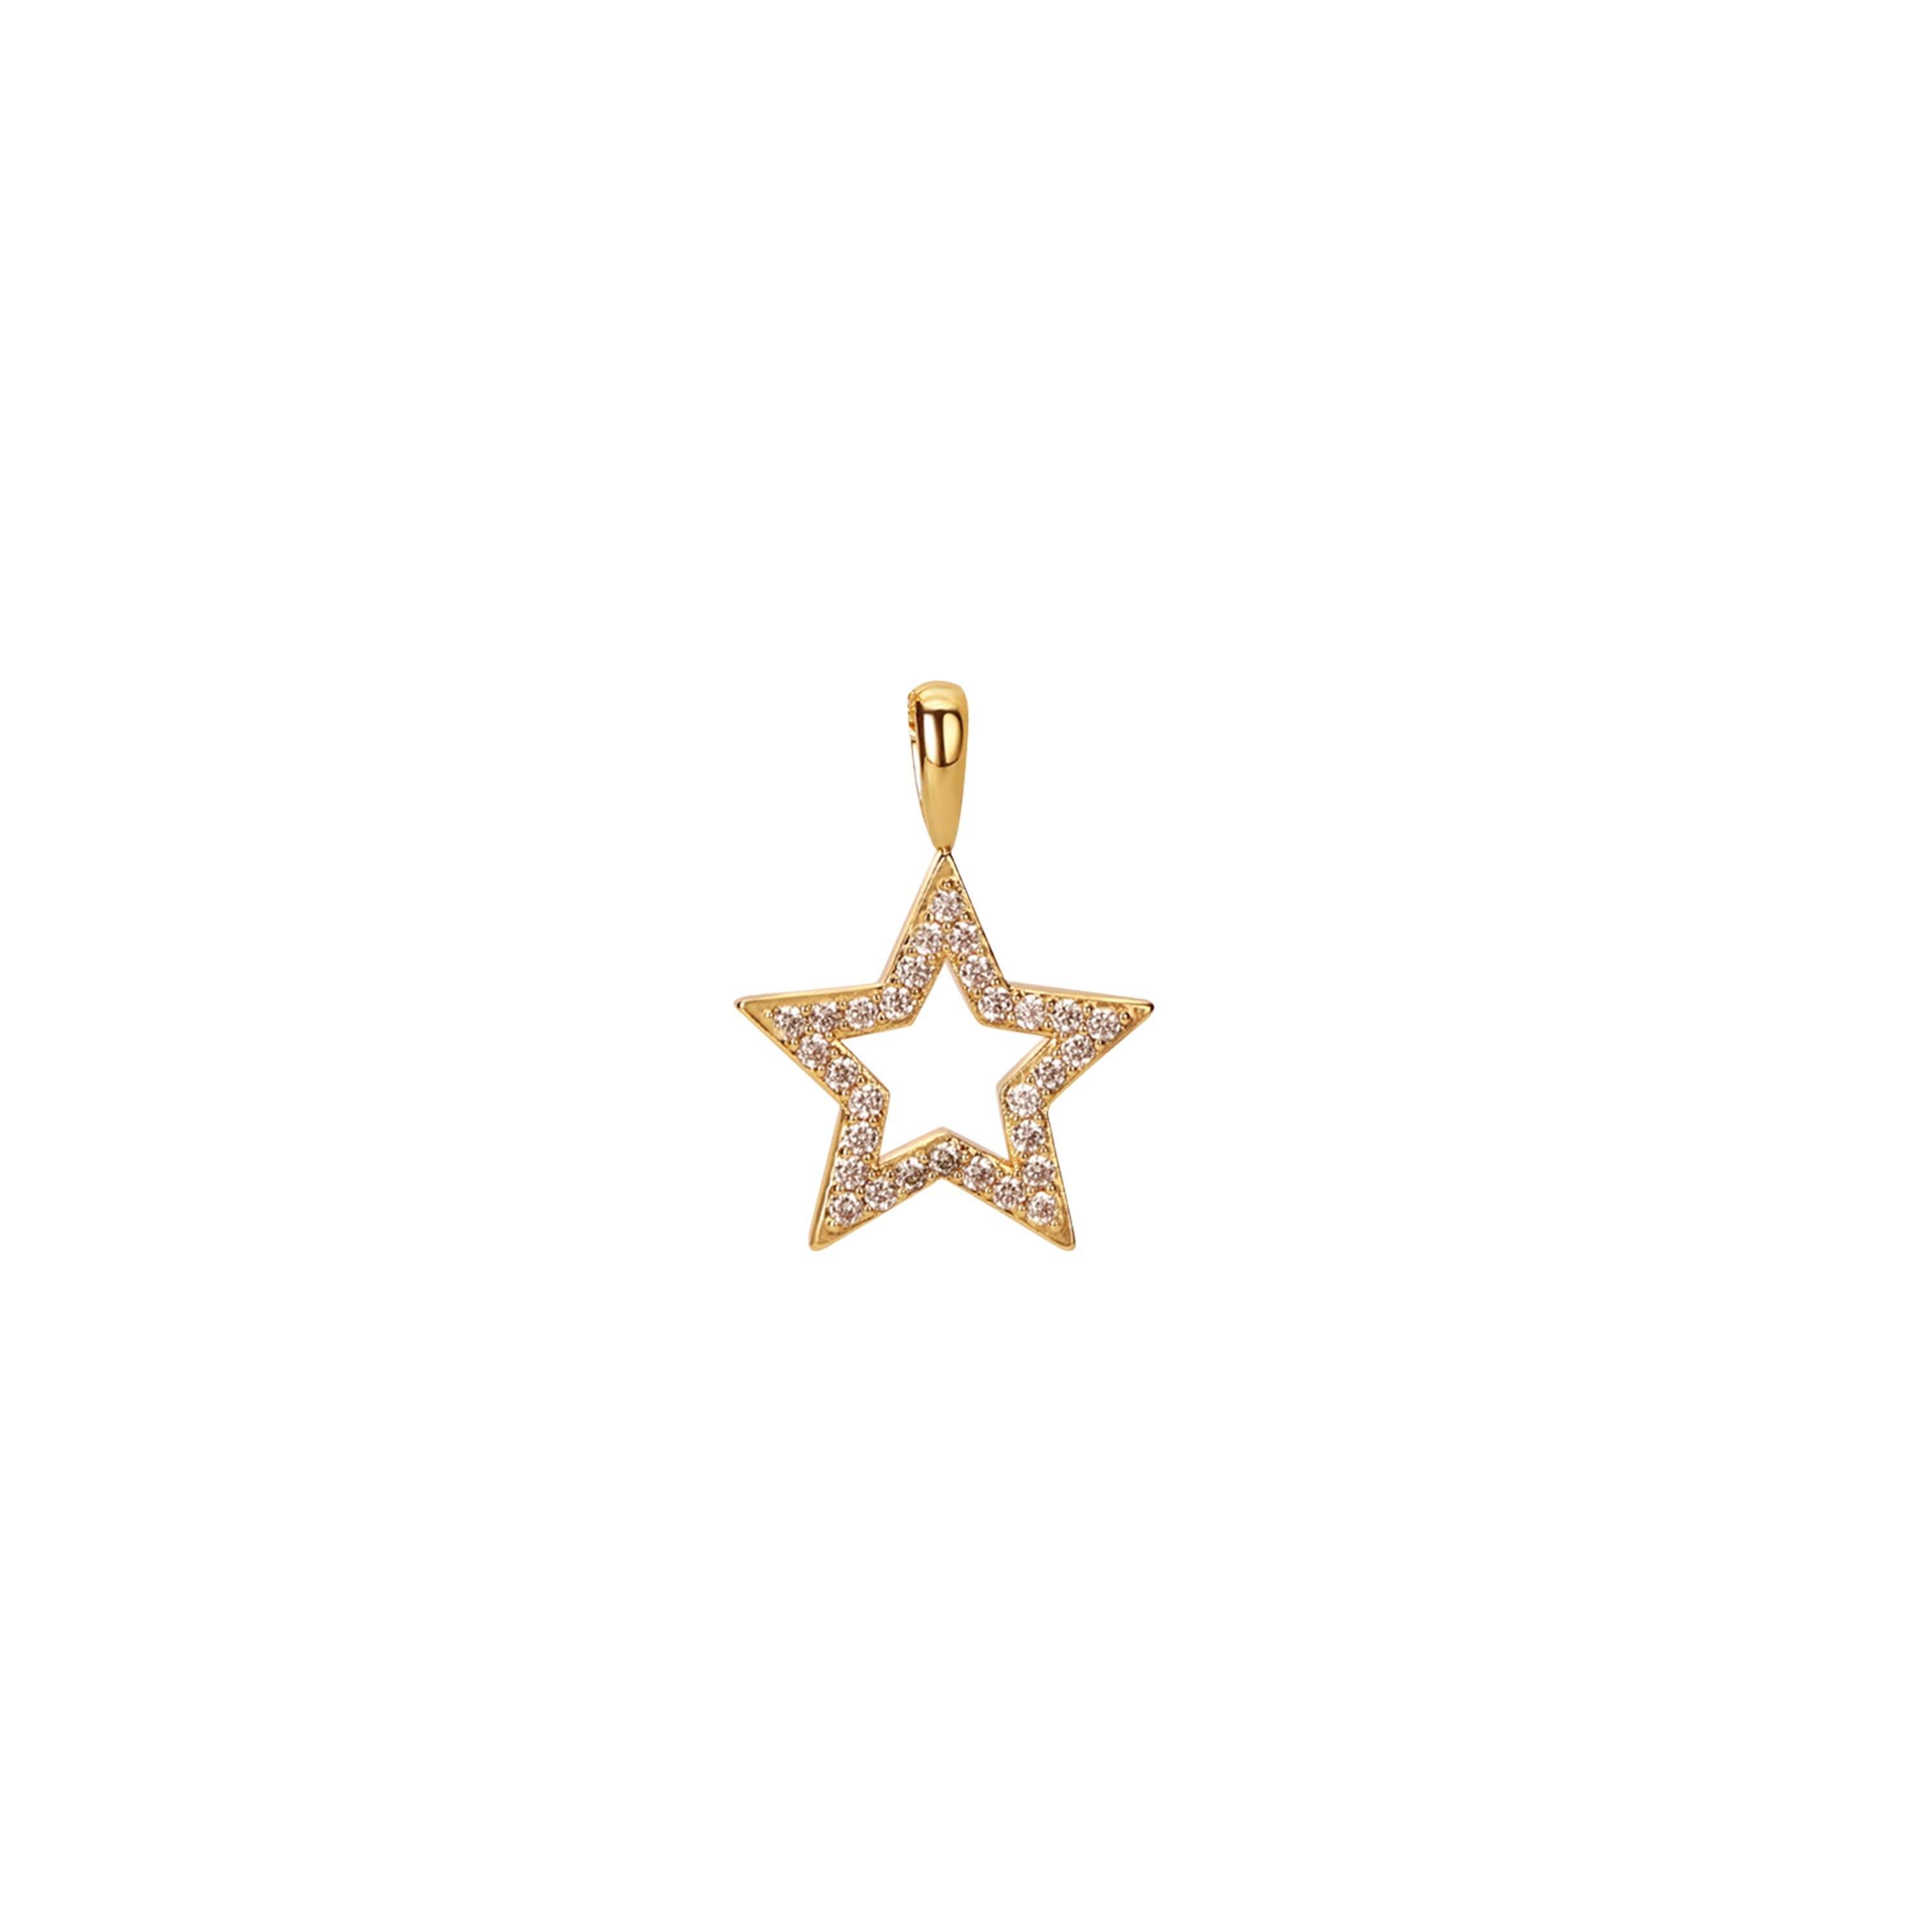 bejewelled star charm gold pendant without chain from memara